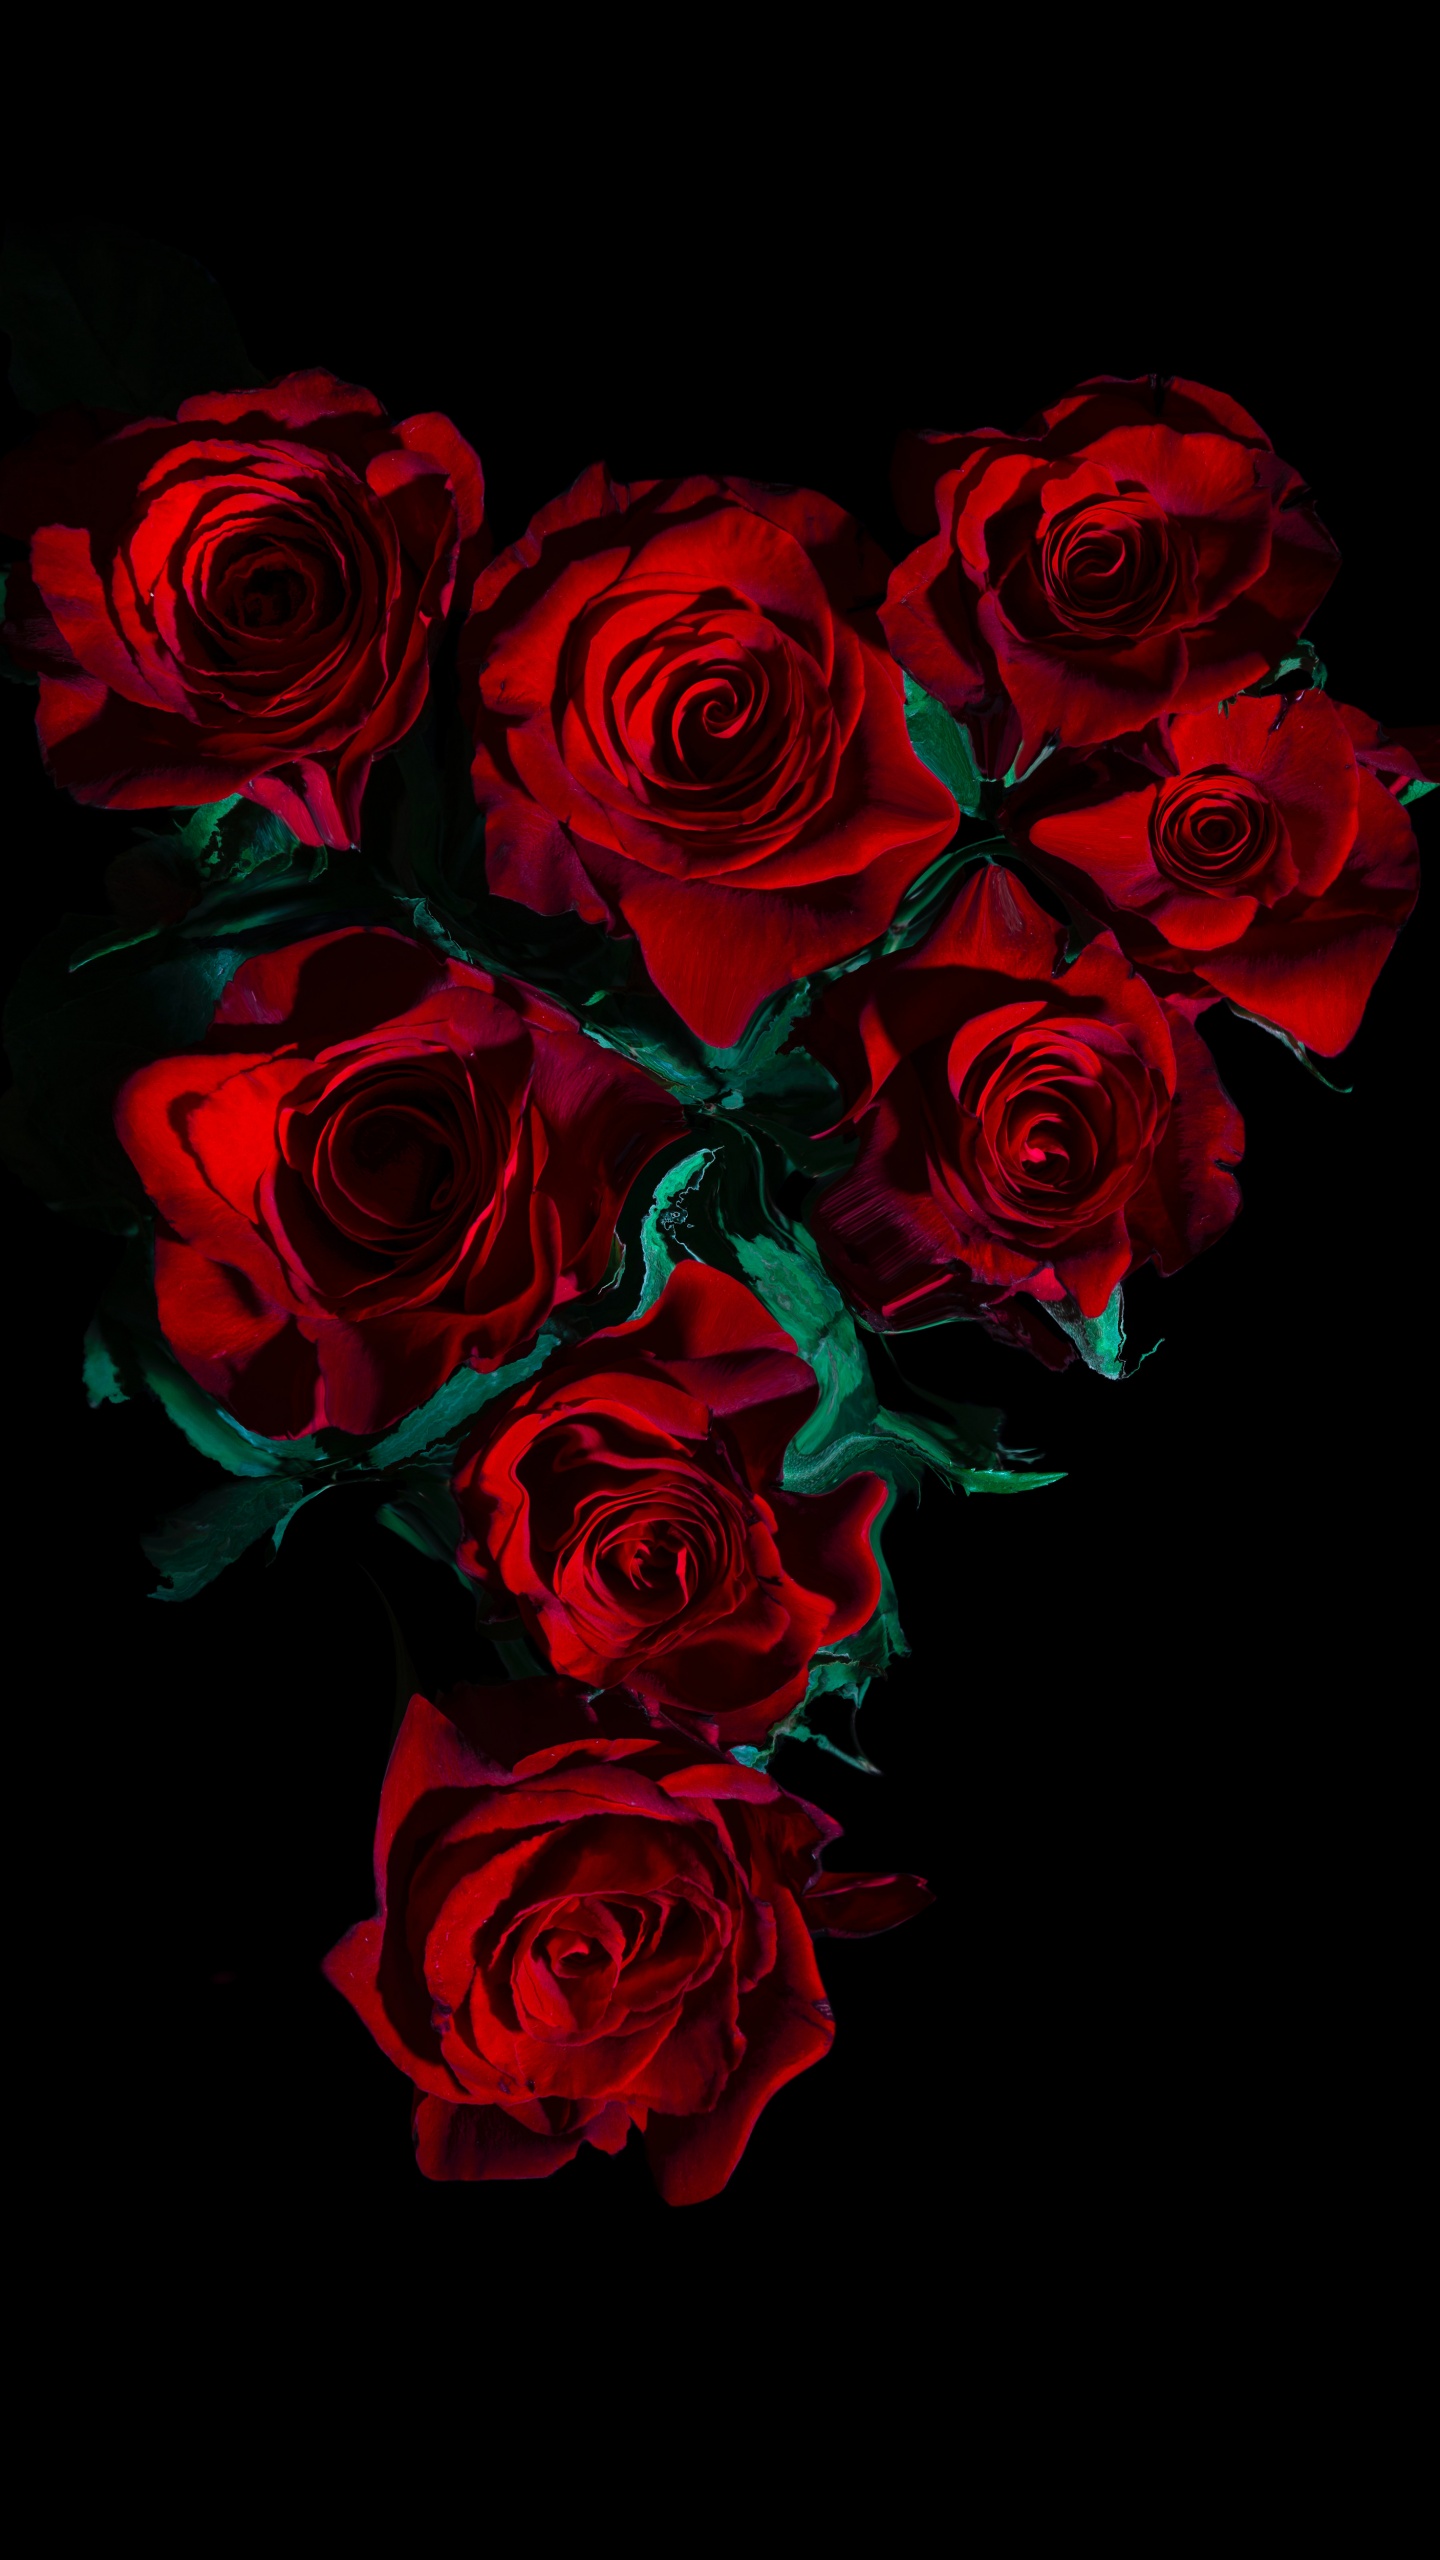 Rose DP for WhatsApp | Best Collection of Red Love Rose Image HD Free